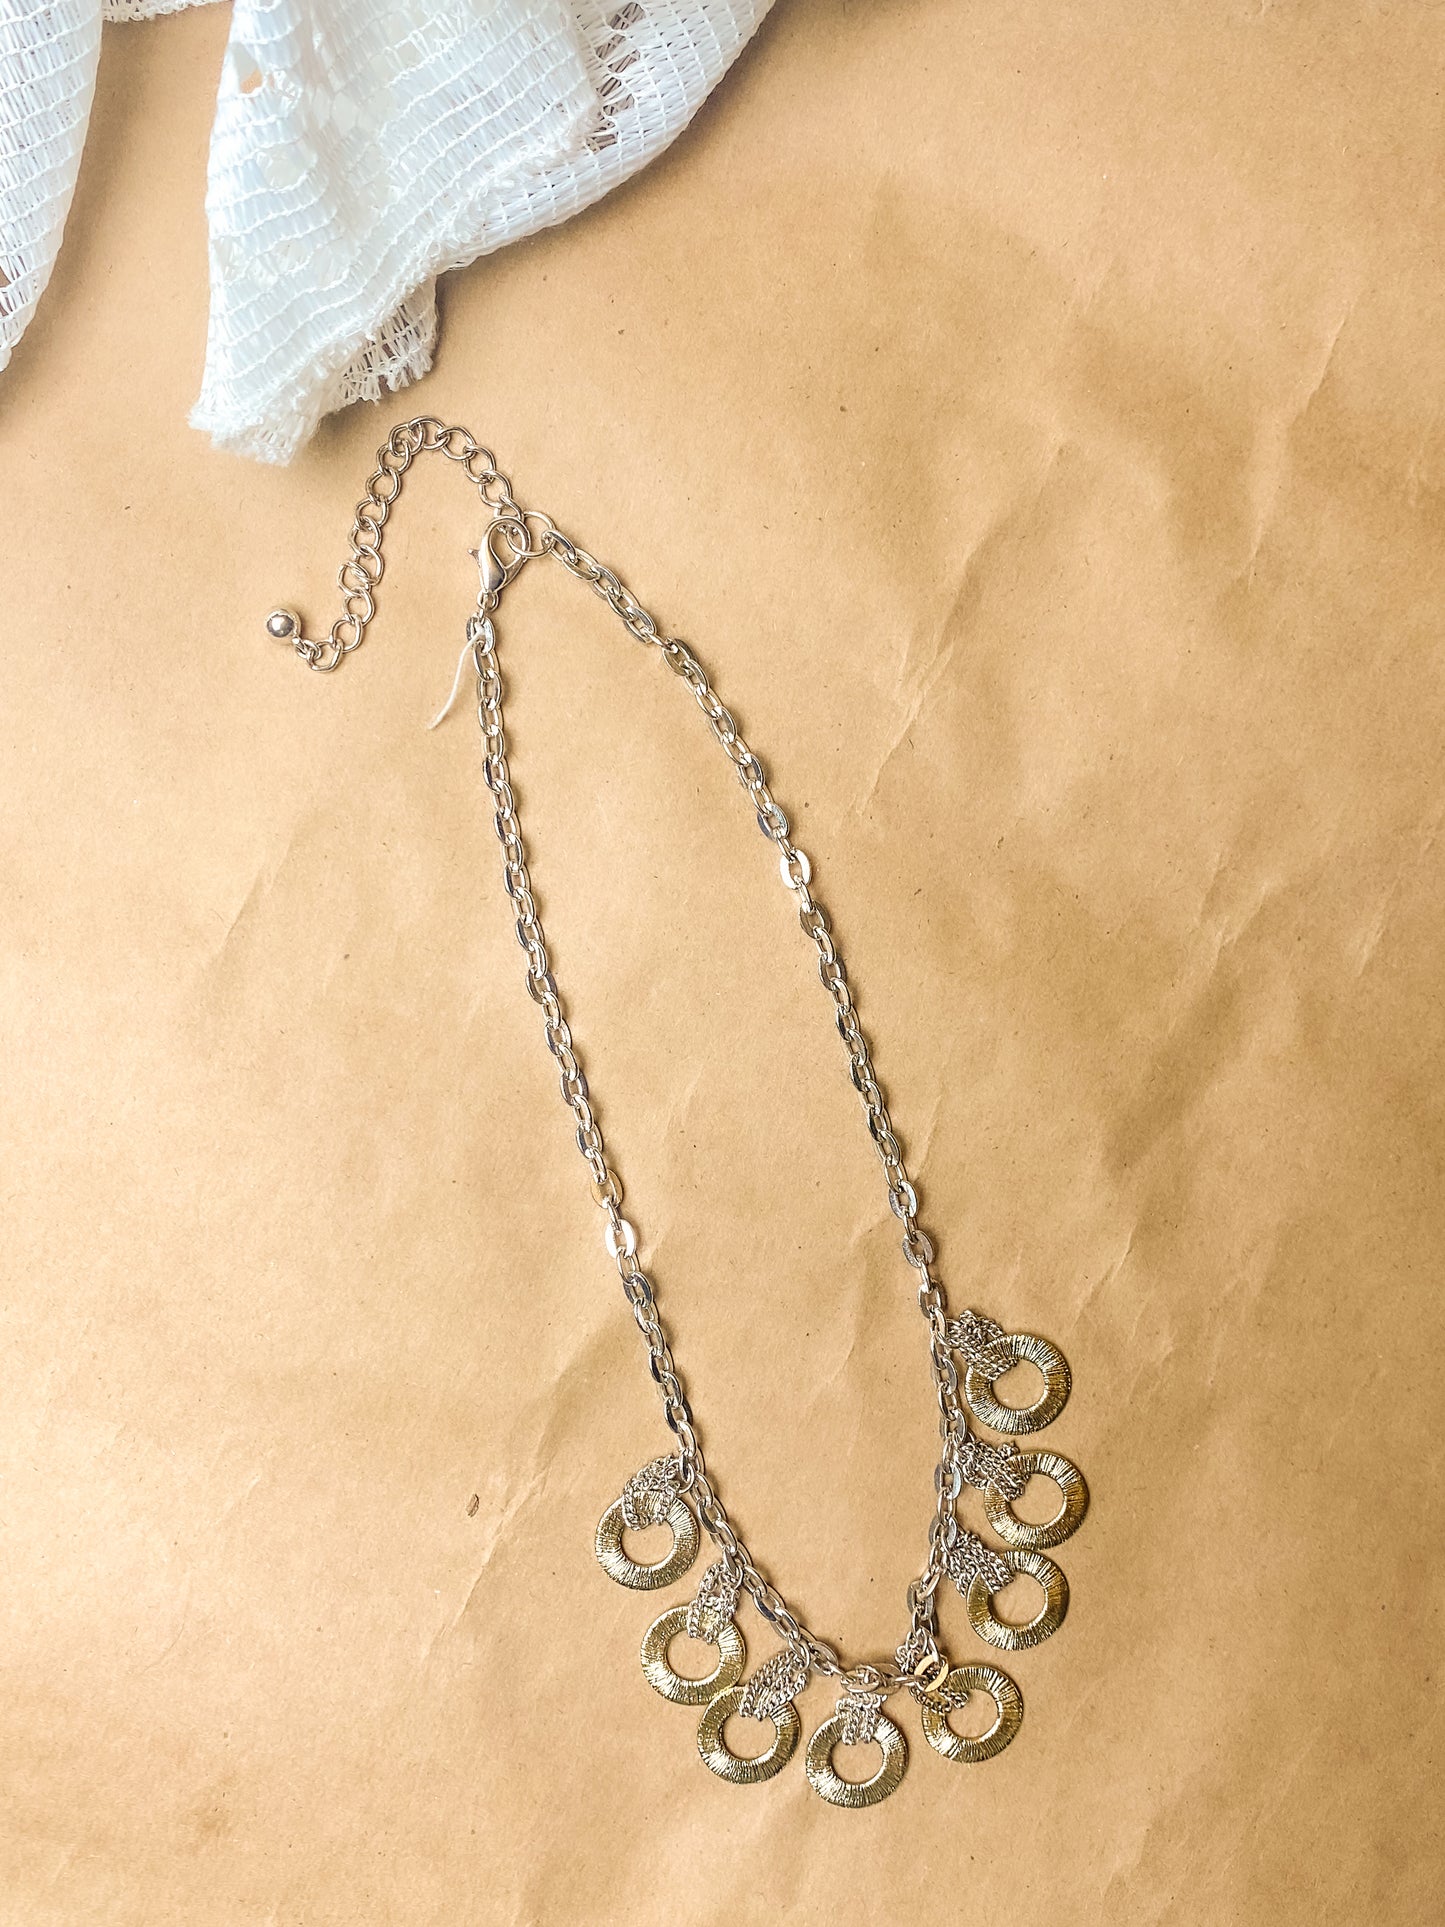 90s Silver and Gold Hoop Necklace